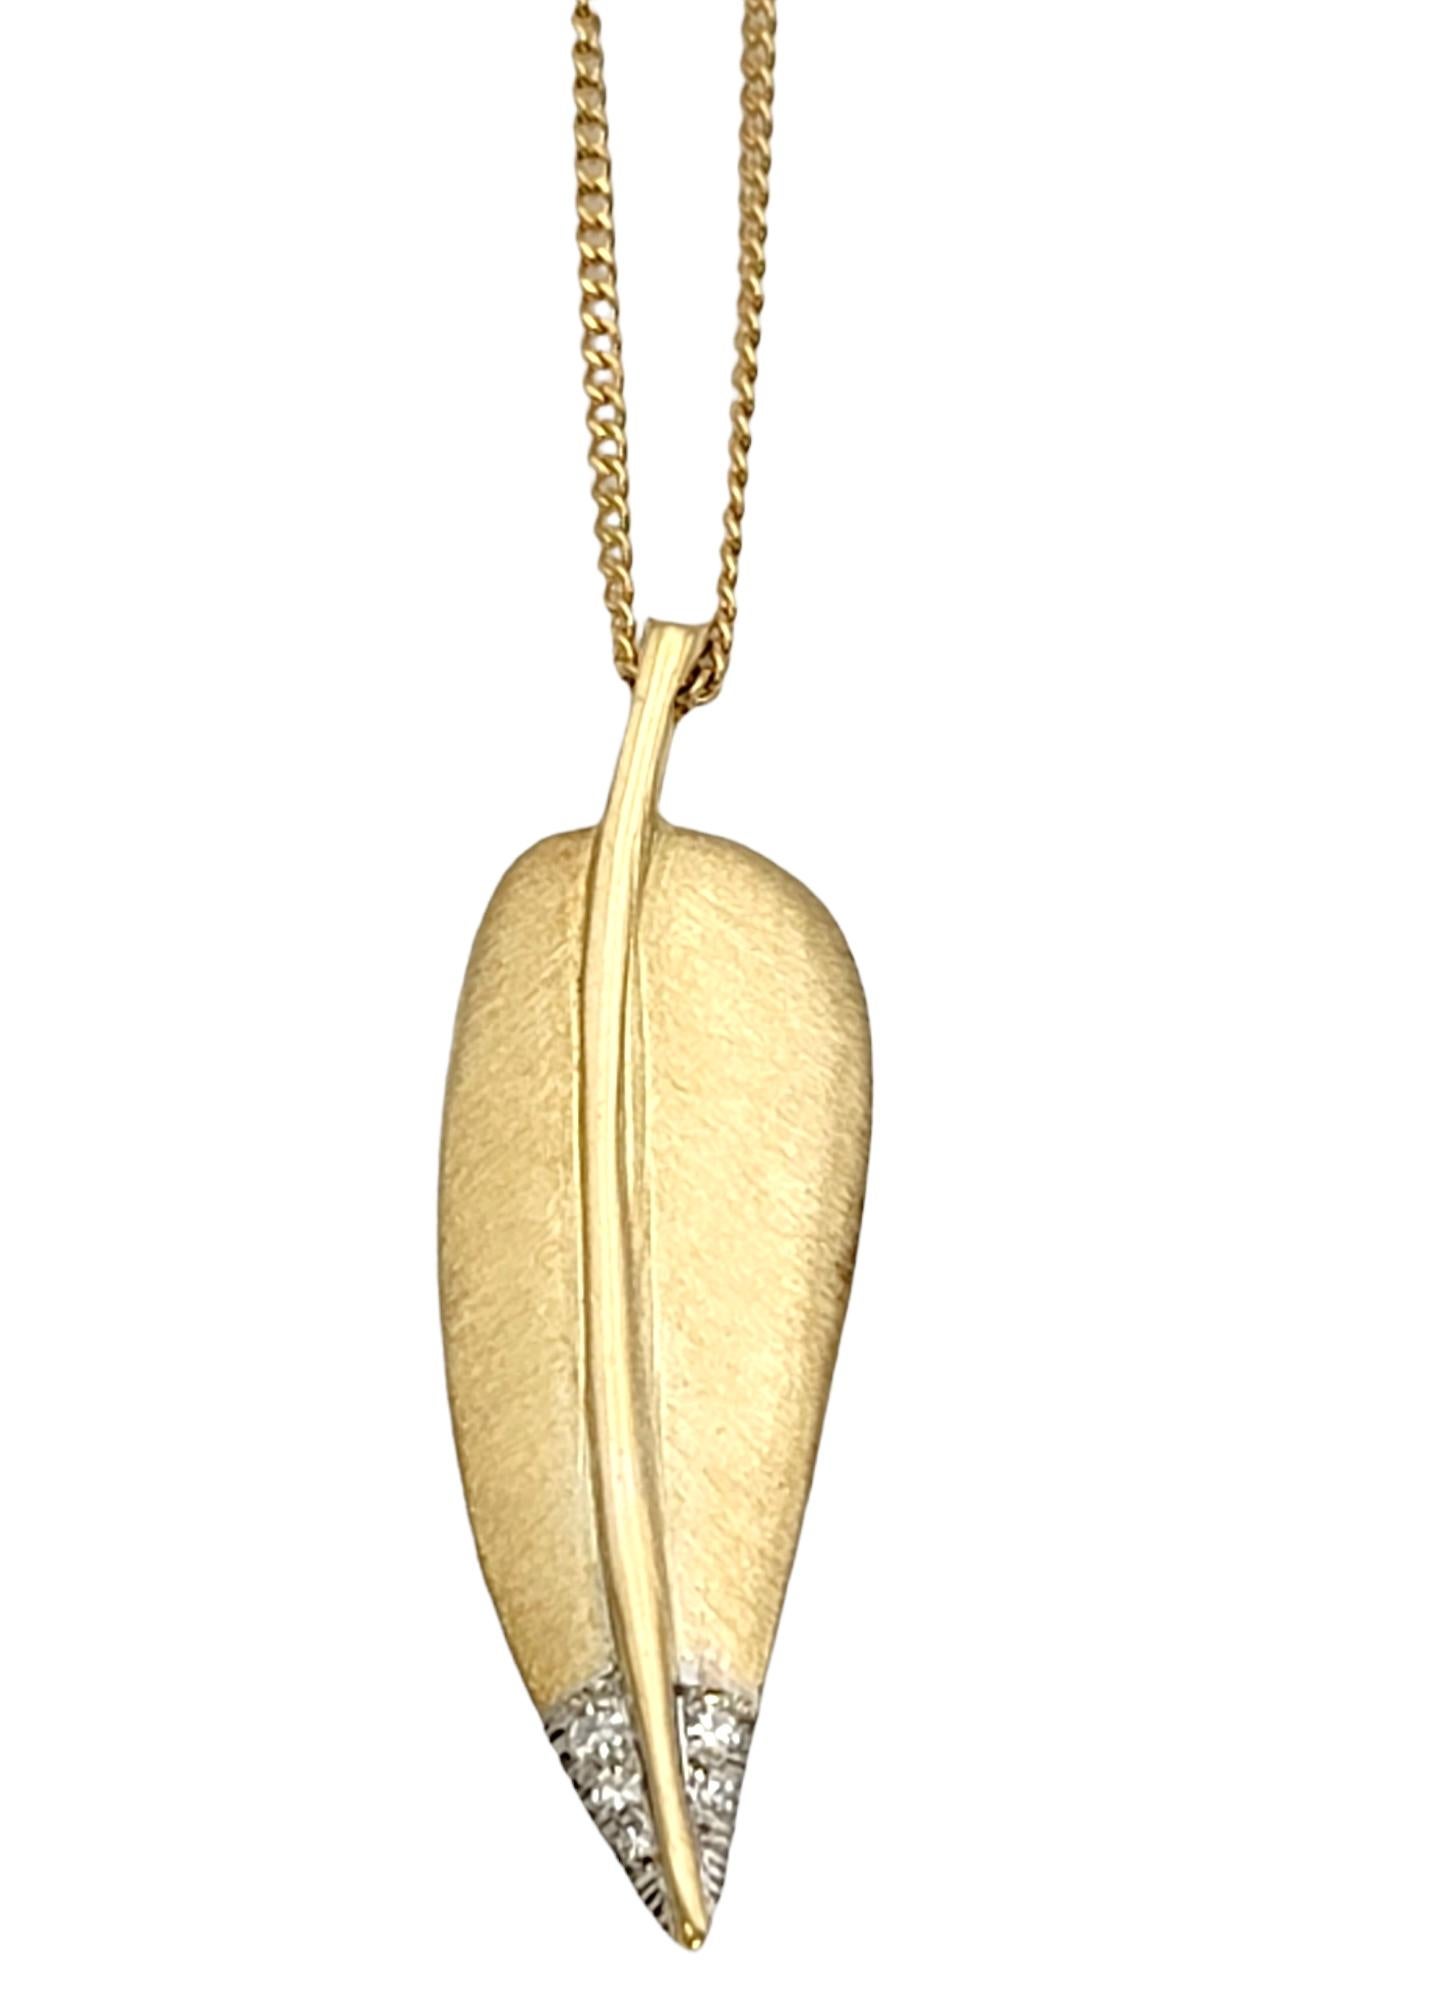 Beautiful vintage feather pendant necklace designed by Angela Cummings for Tiffany & Co.. This gorgeous 18 karat yellow gold piece is simple yet stunning on the neck.  Set on a delicate chain, the feather is done in a softer, brushed finish, while